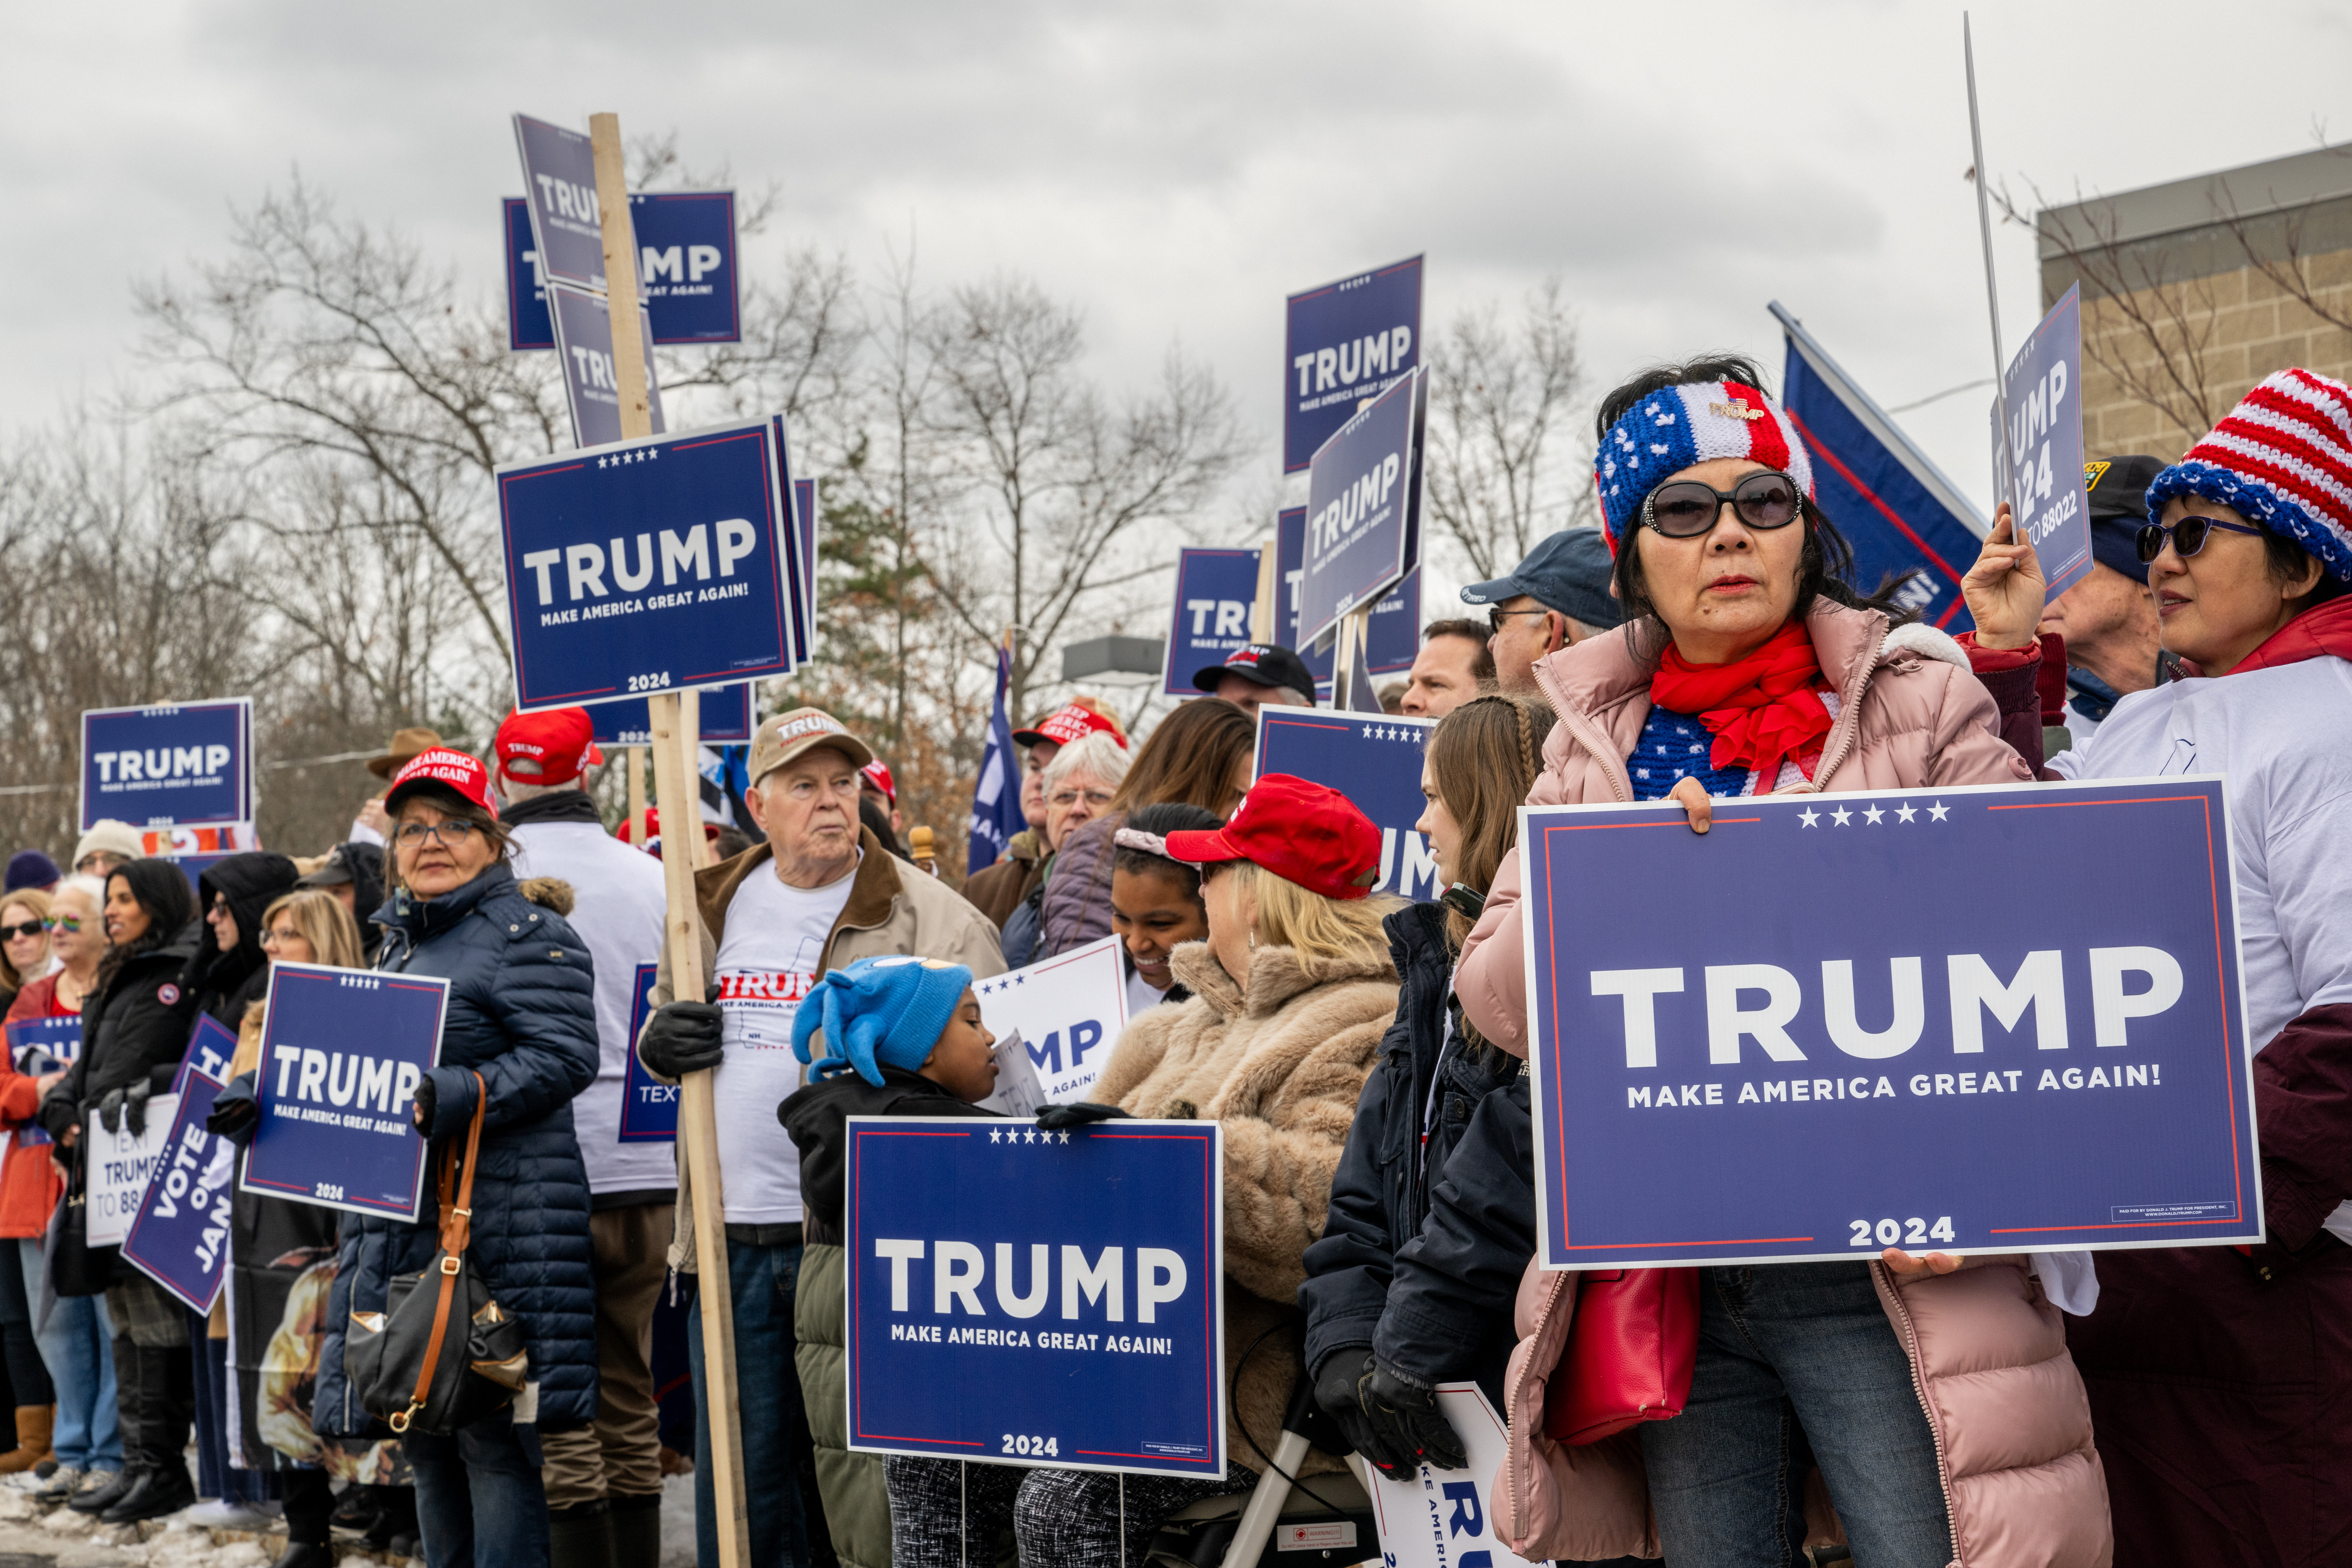 Trump supporters made themselves heard in the Granite State